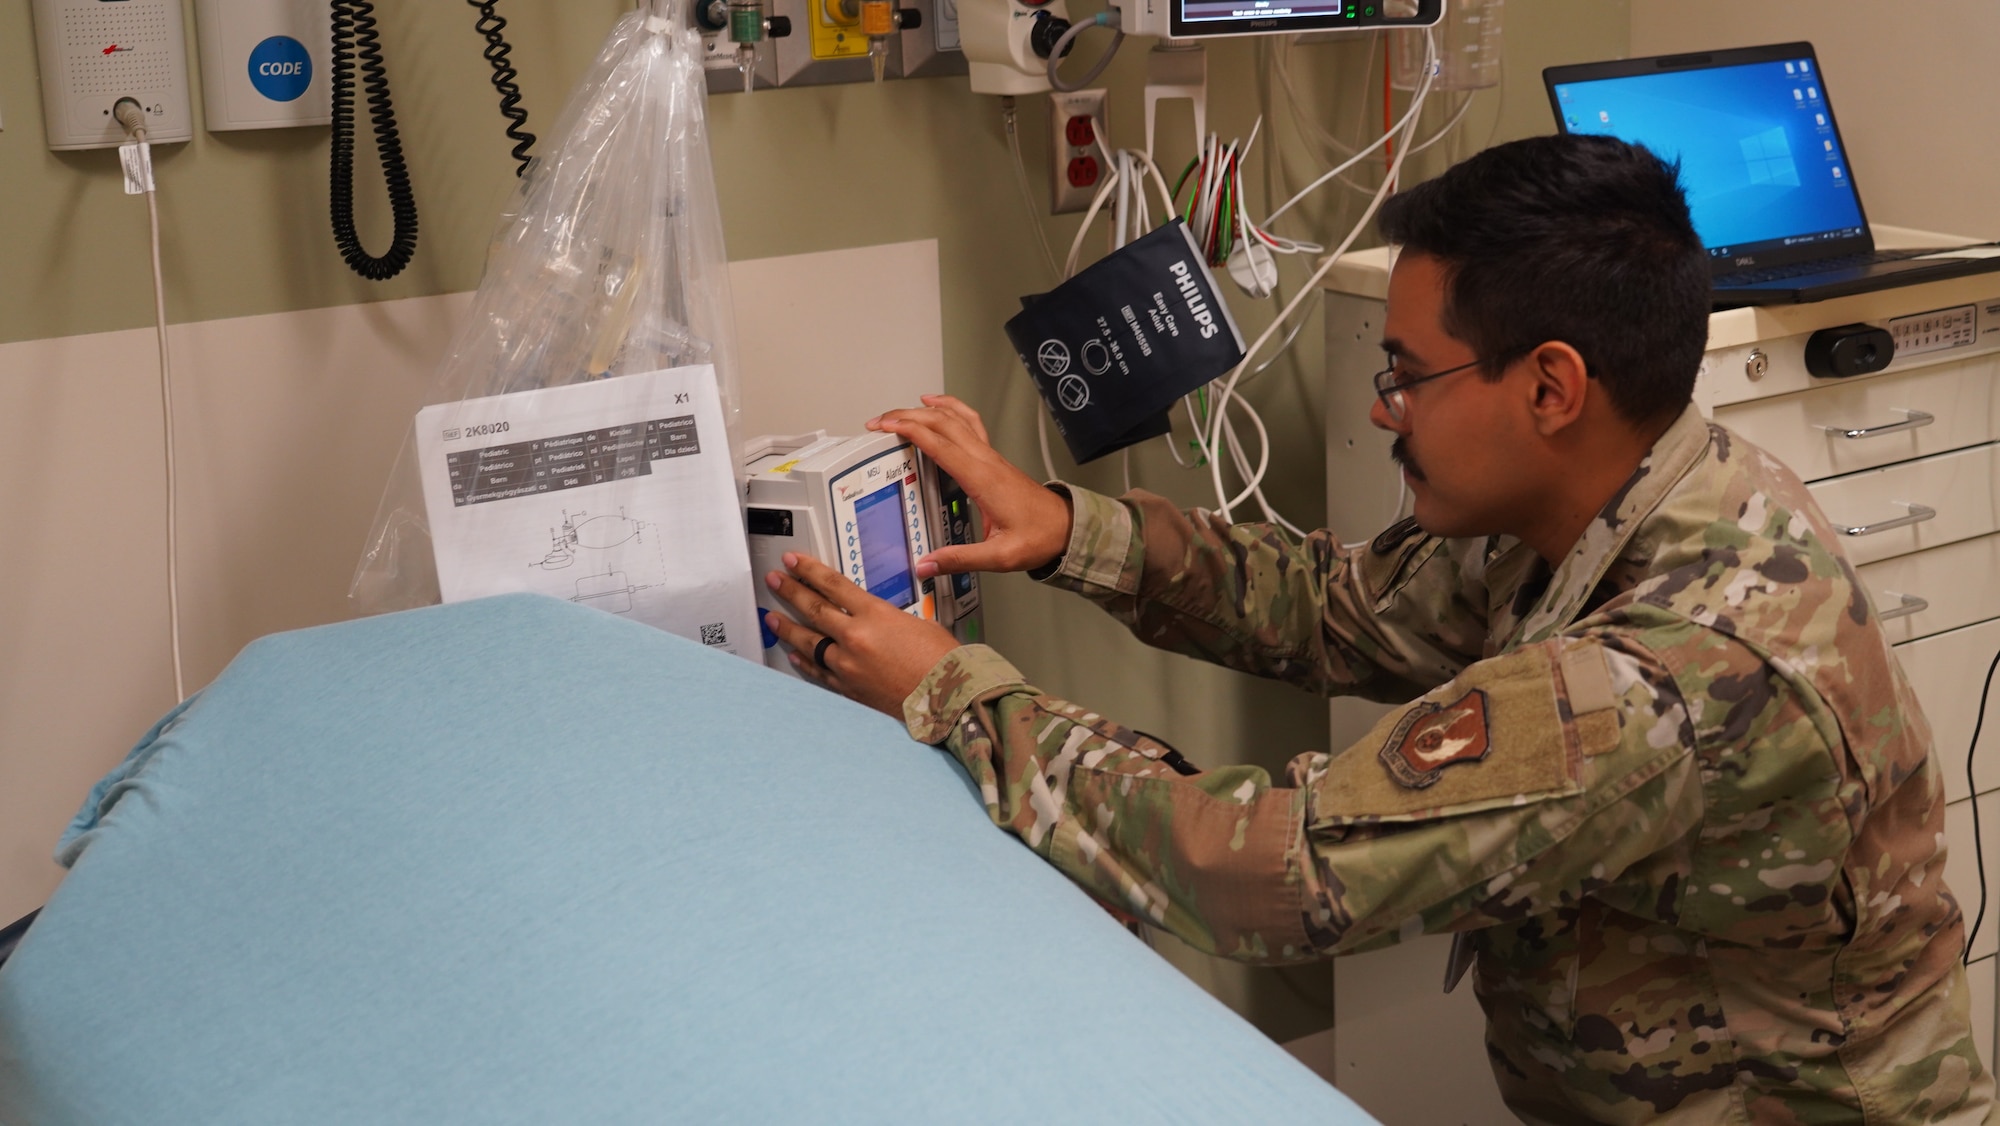 Airman 1st Class Lafayette Ragsdale, an 88th Medical Support Squadron biomedical equipment technician, checks an inventory update in the emergency room at Wright-Patterson Medical Center, June 29, 2023. The squadron helps “dominate the dirty work” for the 88th Medical Group, keeping daily operations on course while resourcing the Air Force’s second-largest hospital. (U.S. Air Force photo by Kenneth J. Stiles)